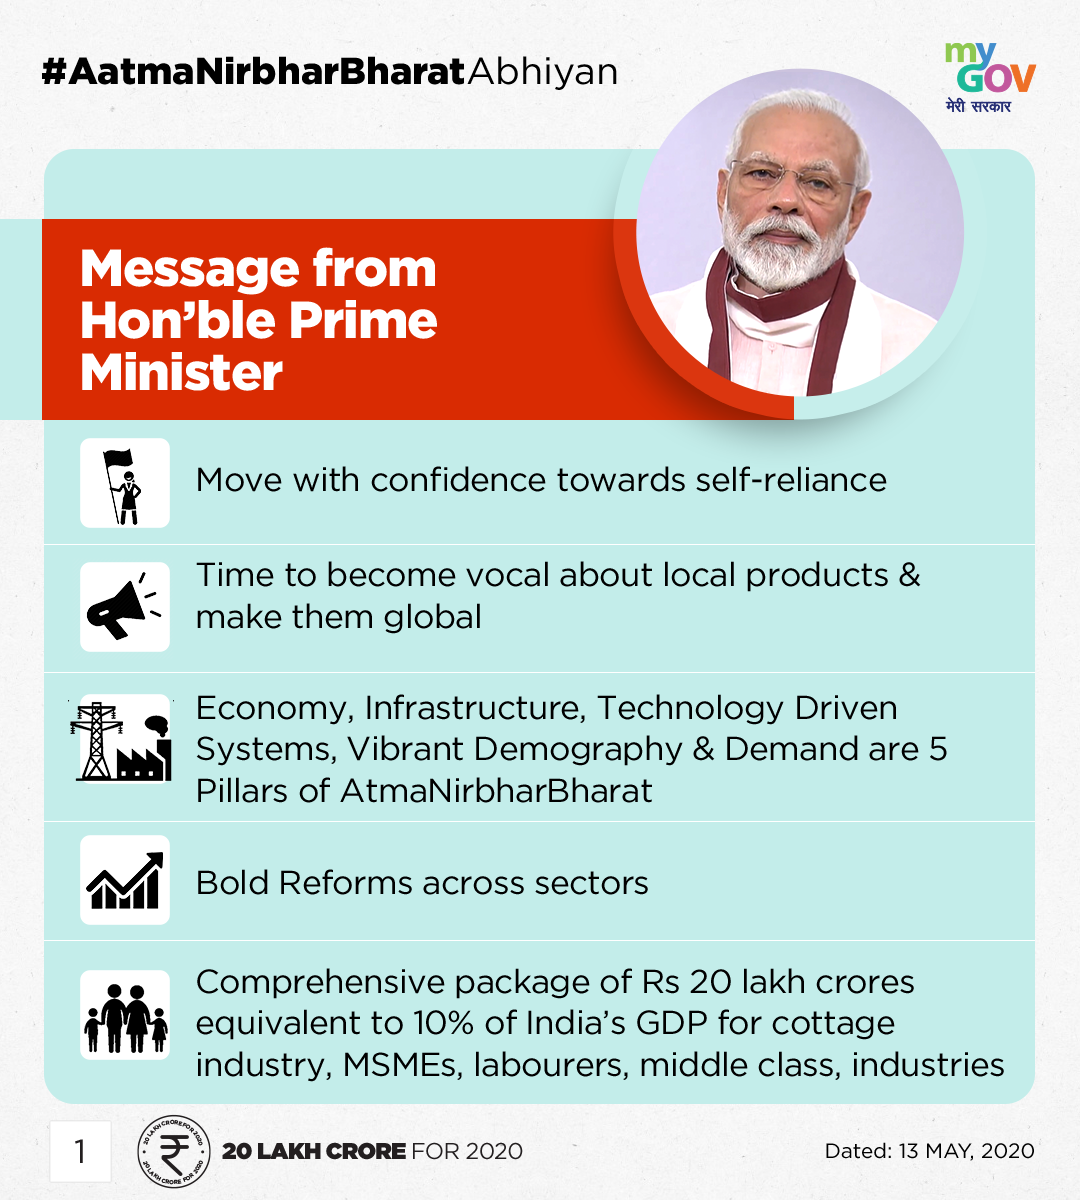 Message from Hon’ble Prime Minister